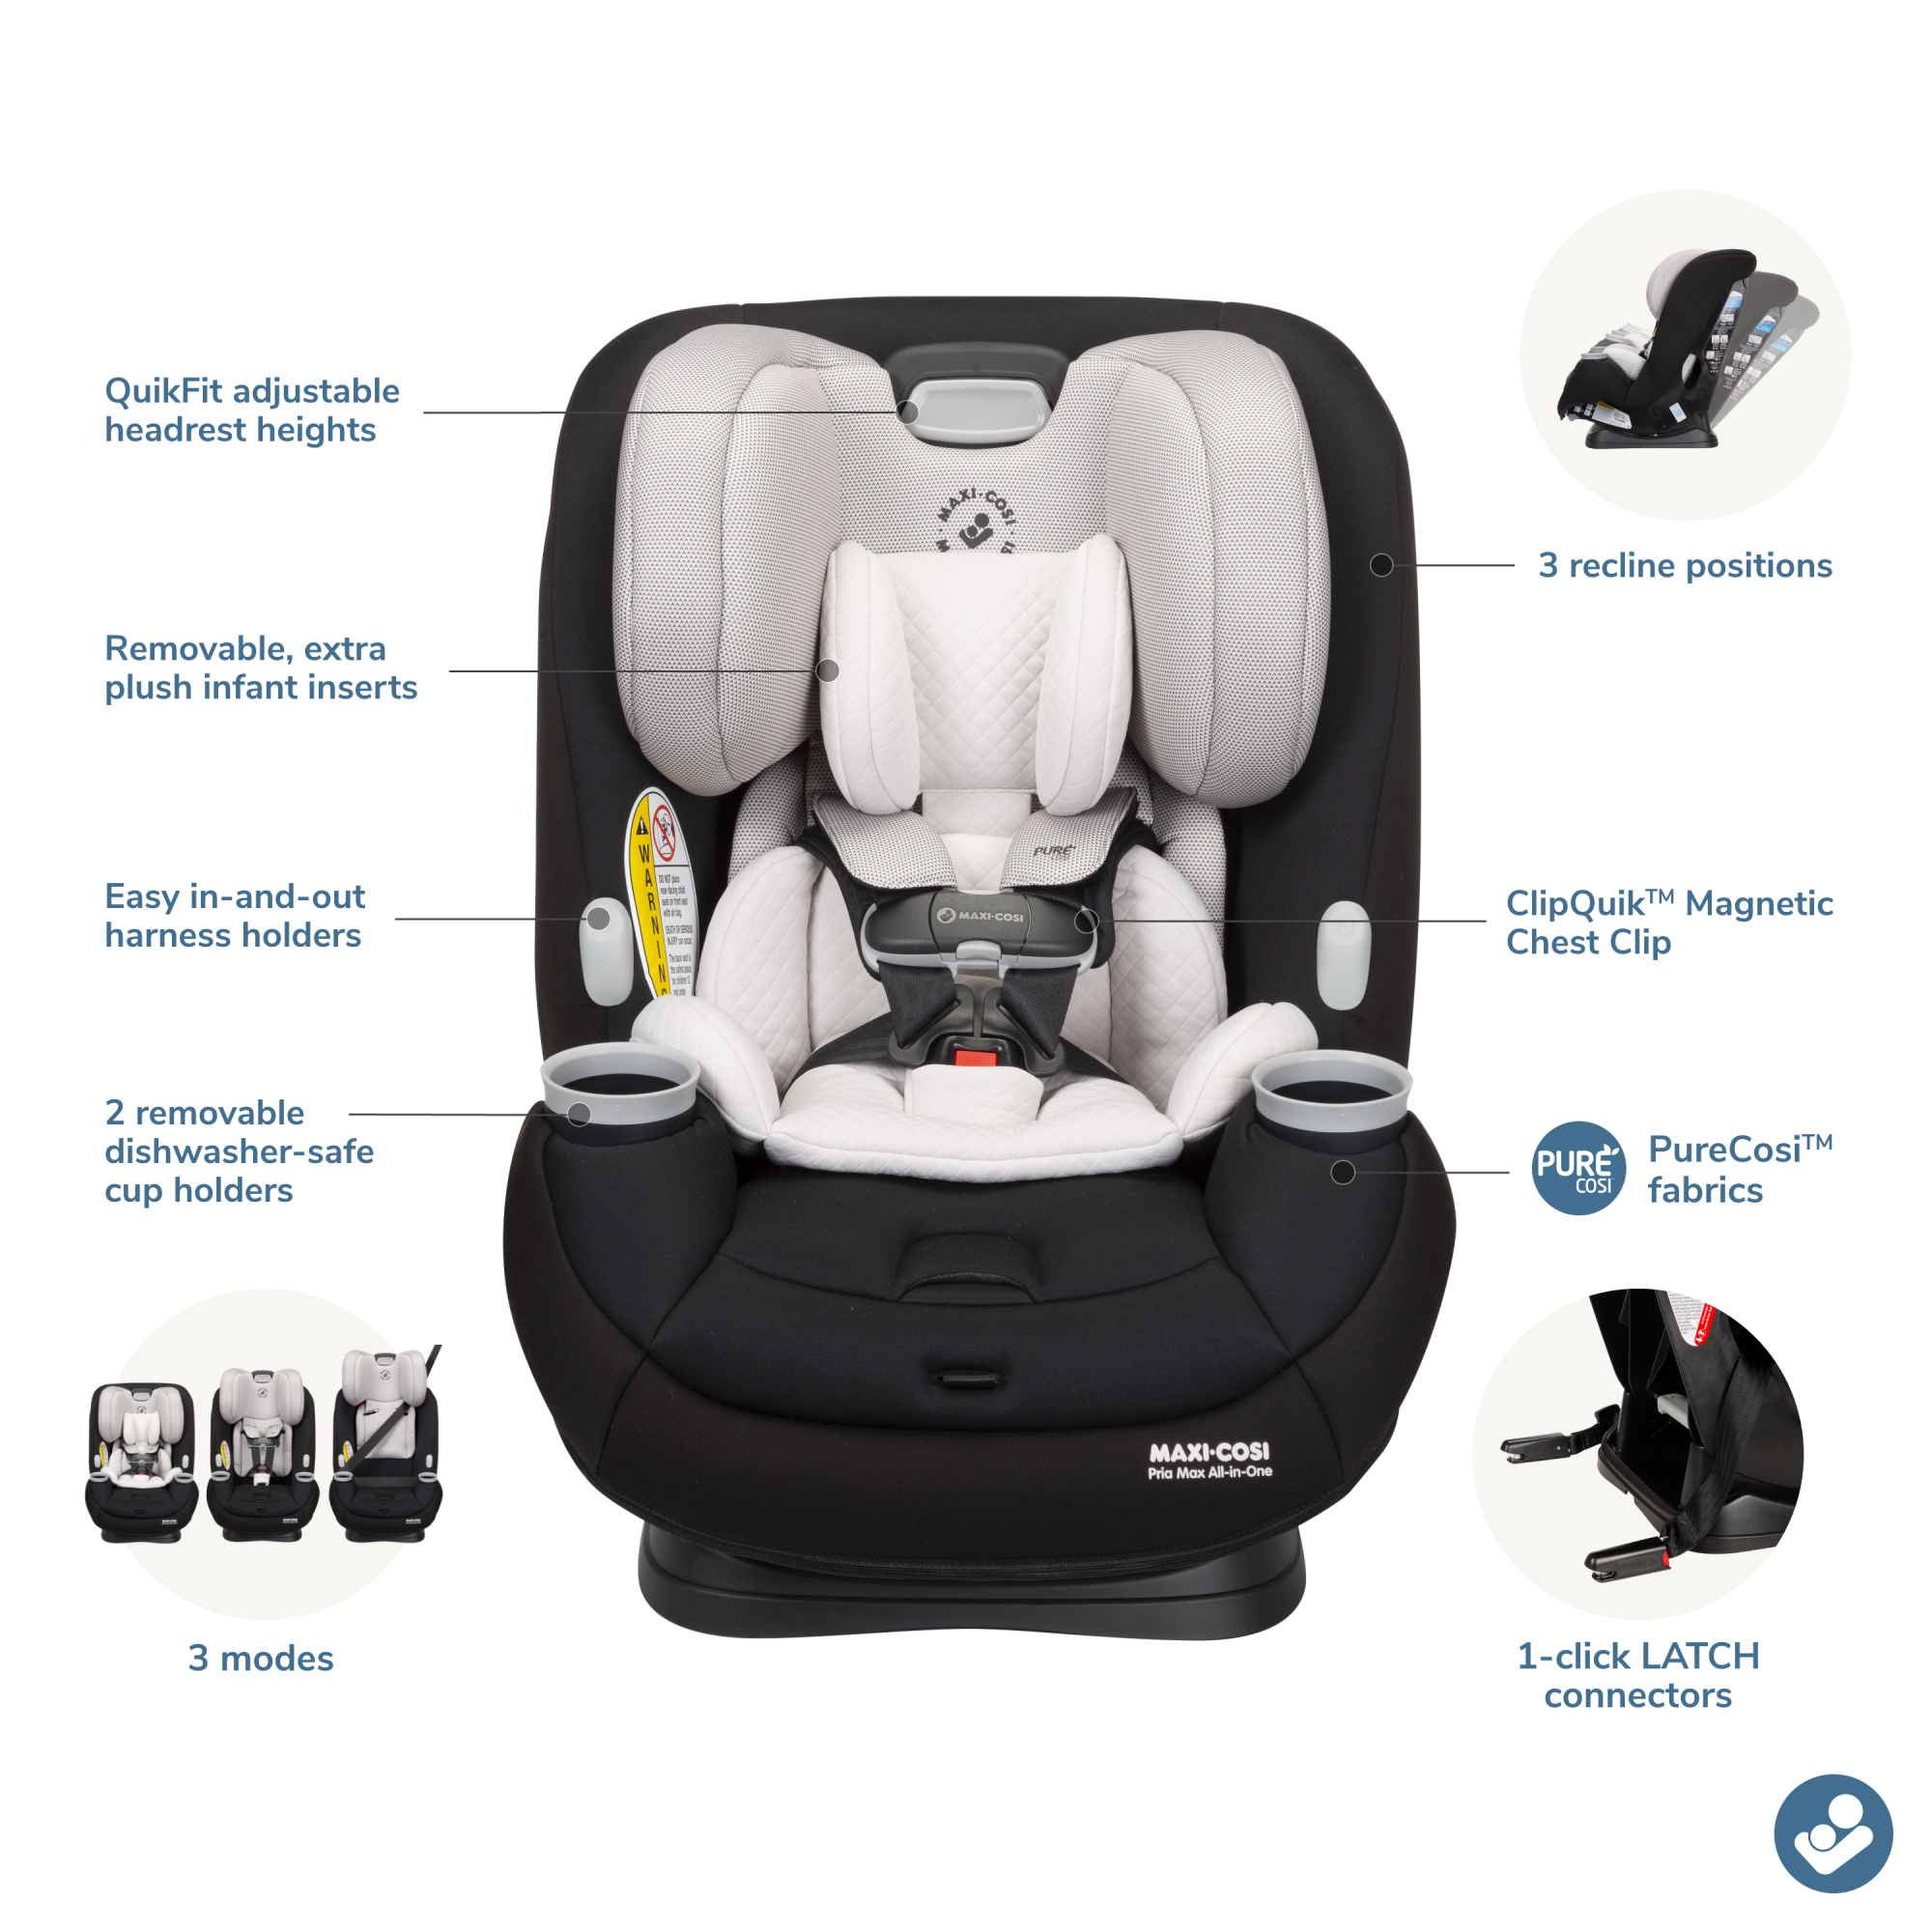 Pria™ Max All-in-One Convertible Car Seat - hotspot image showing all features